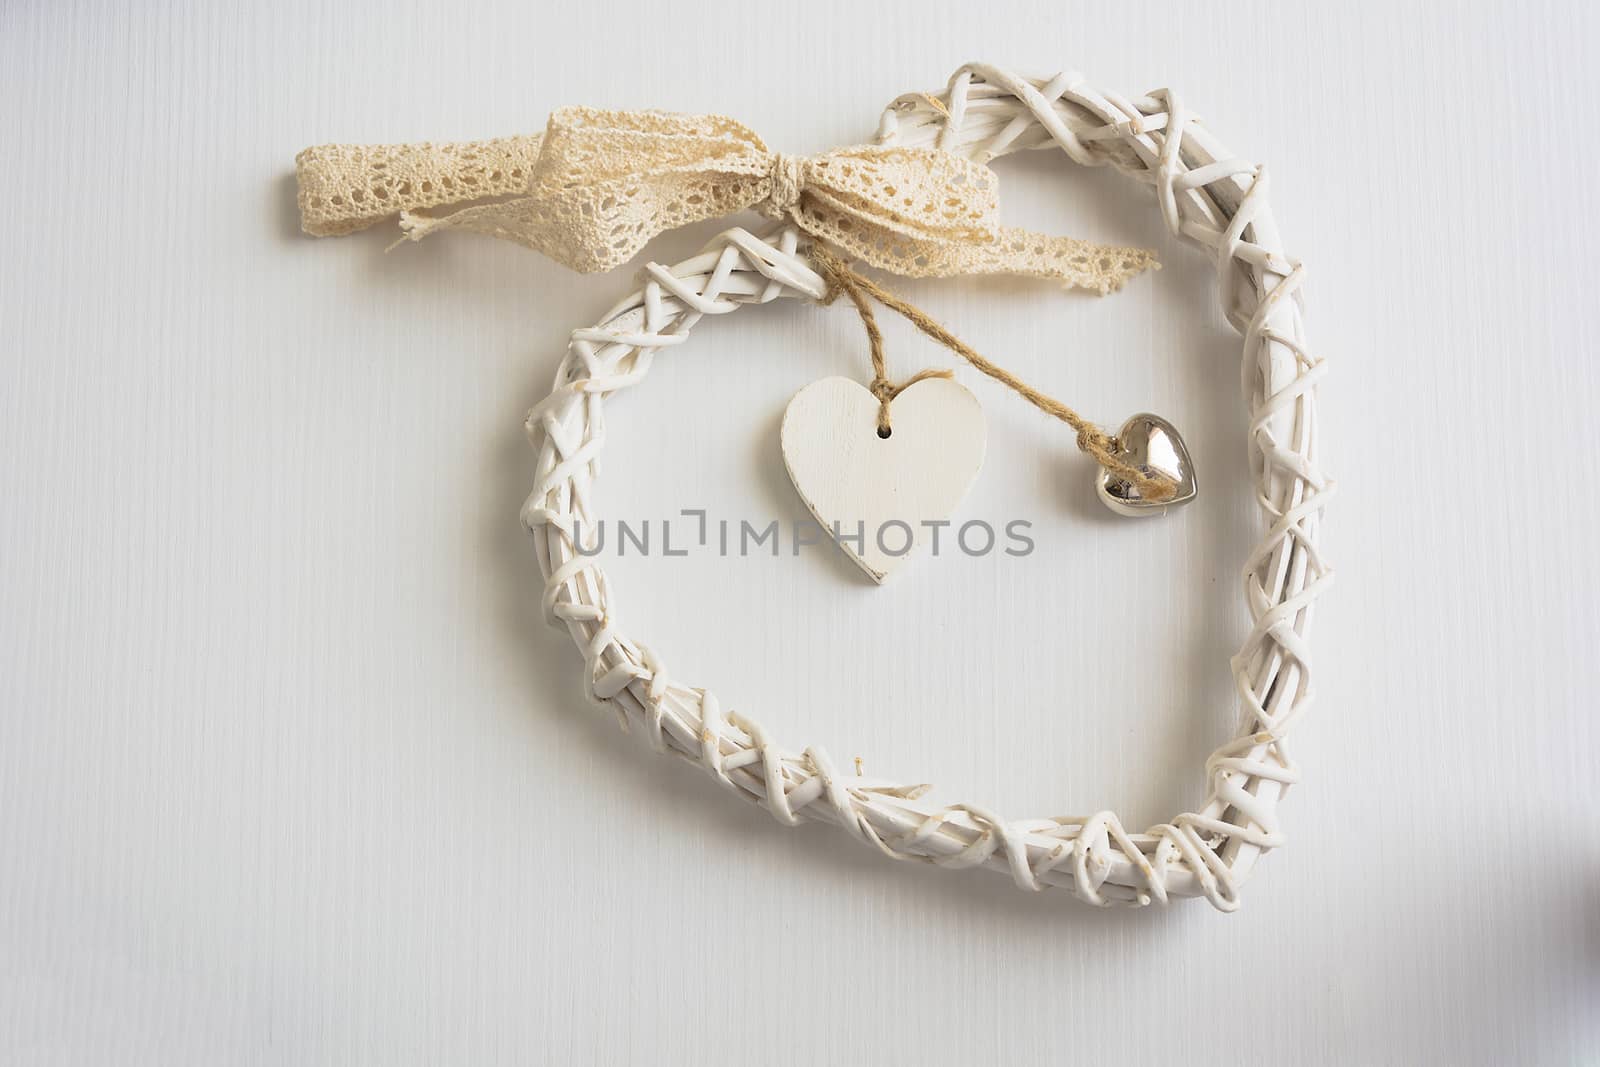 Two wooden hearts placed nicely on a white wood background